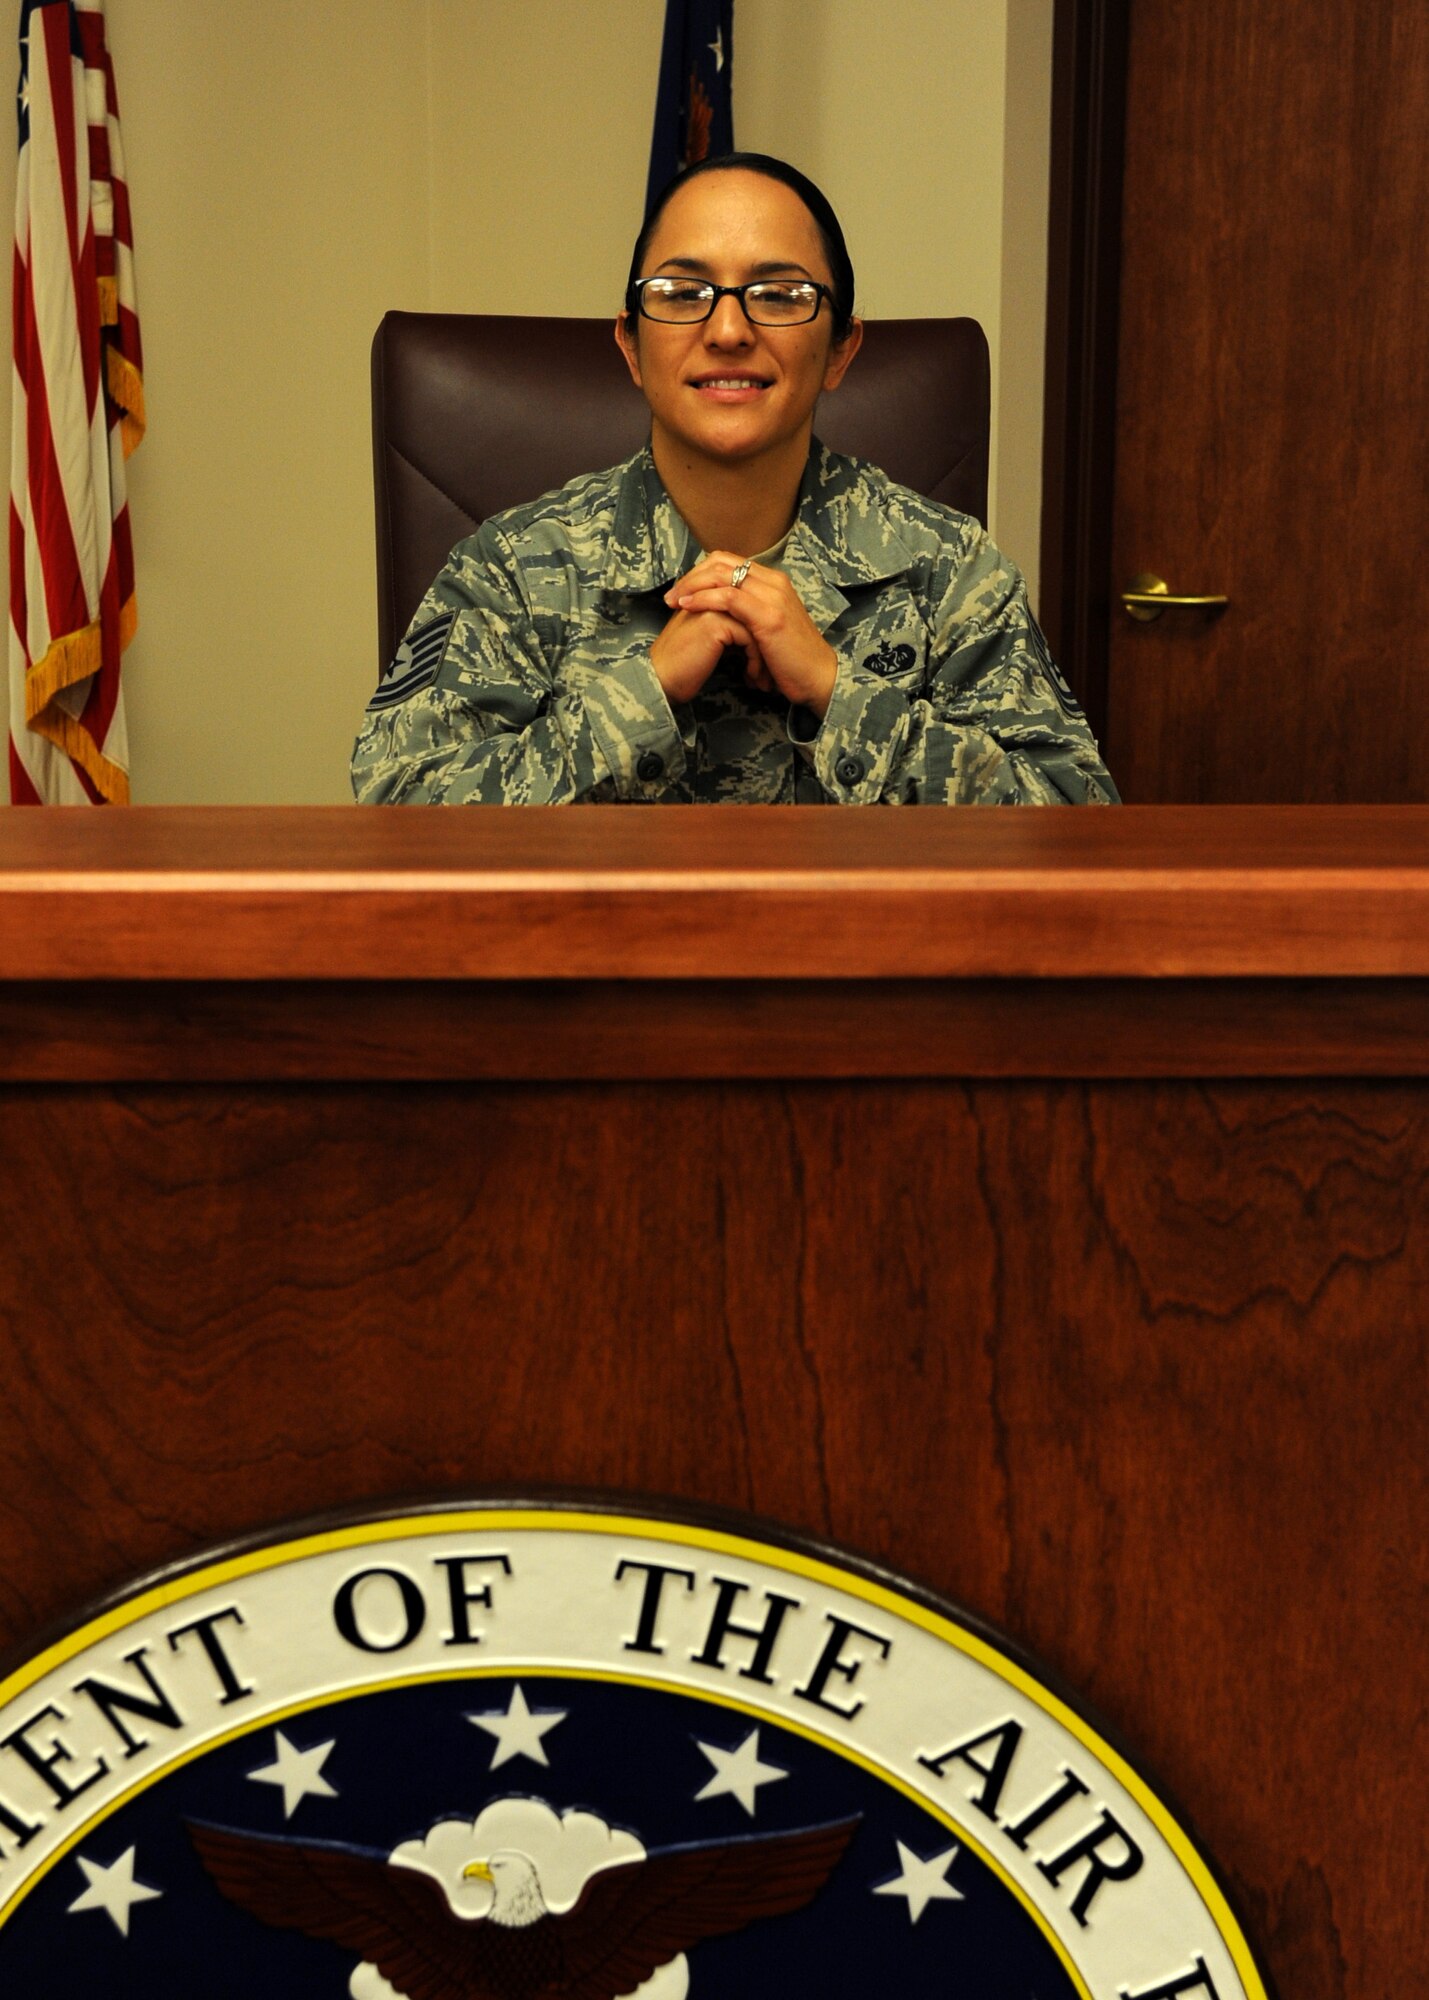 Tech. Sgt. Crystal Lopez, 319th Air Base Wing legal office NCO-in-charge, poses for a picture in the courtroom Sept. 30, 2015, on Grand Forks Air Force Base, North Dakota. Lopez was selected as the Warrior of the Week for the first week of October 2015. (U.S. Air Force photo by Airman 1st Class Ryan Sparks/Released)